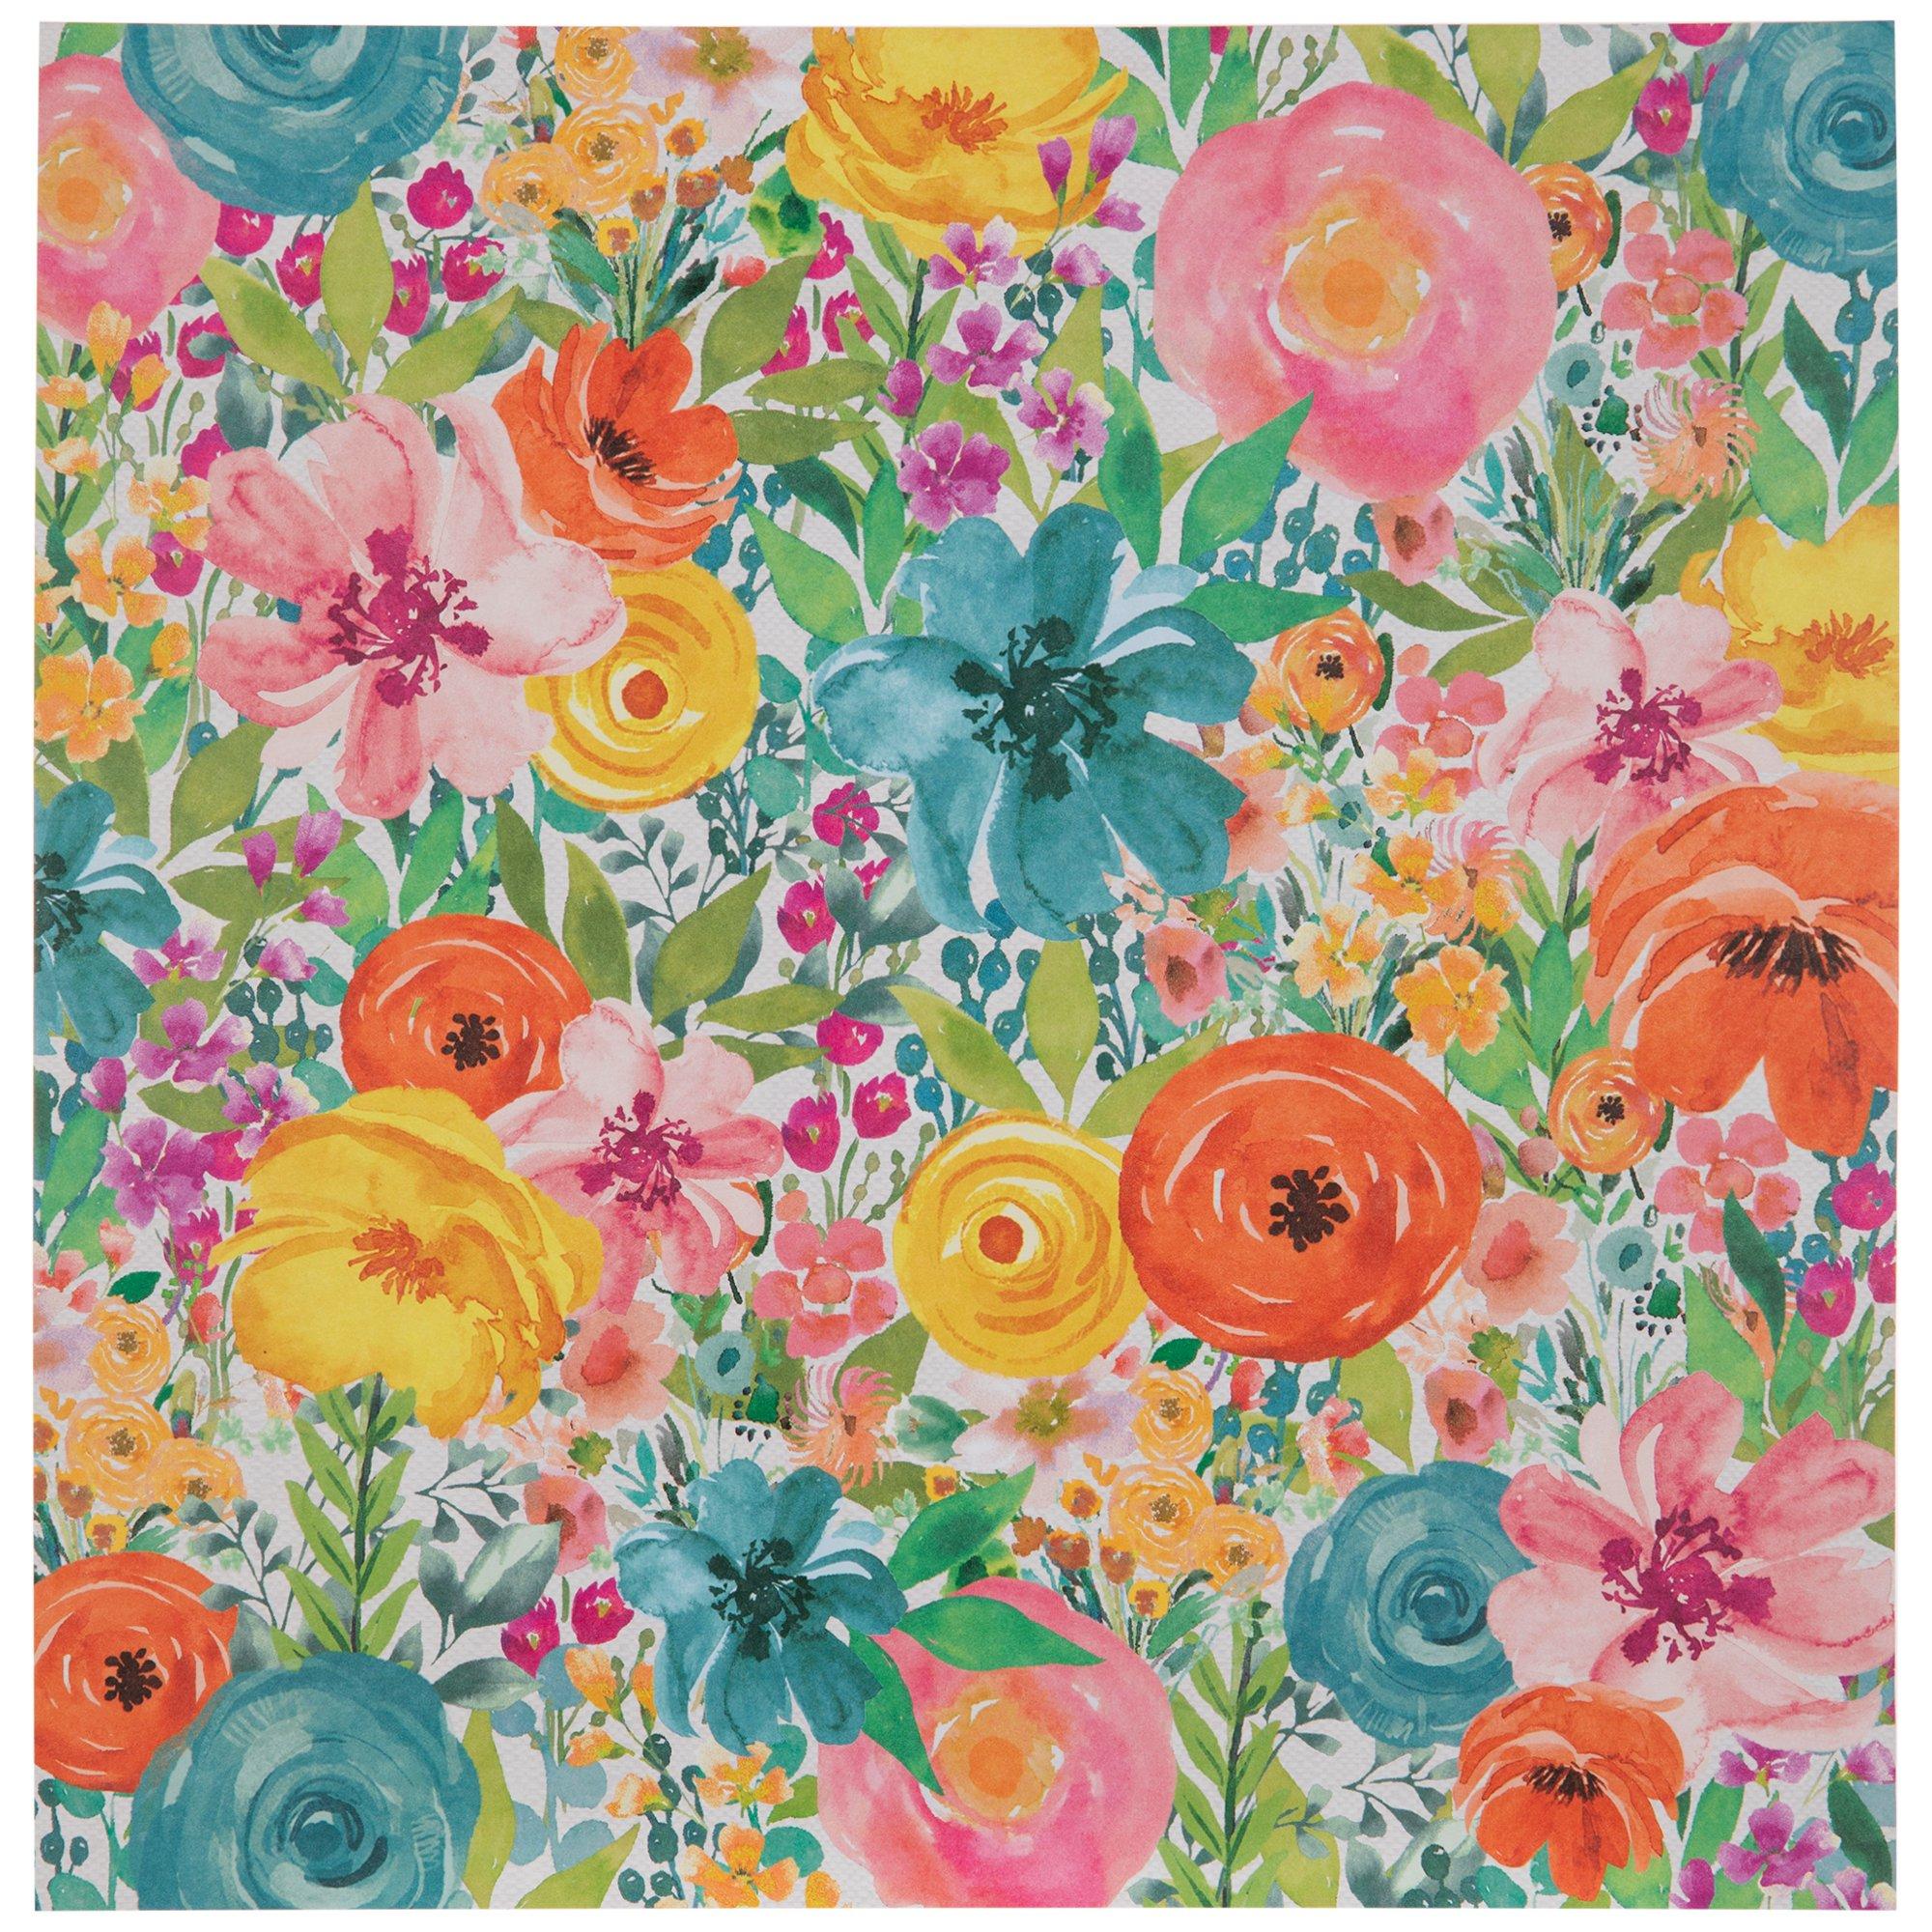 Here There and Everywhere: Bright Floral 12x12 Patterned Paper